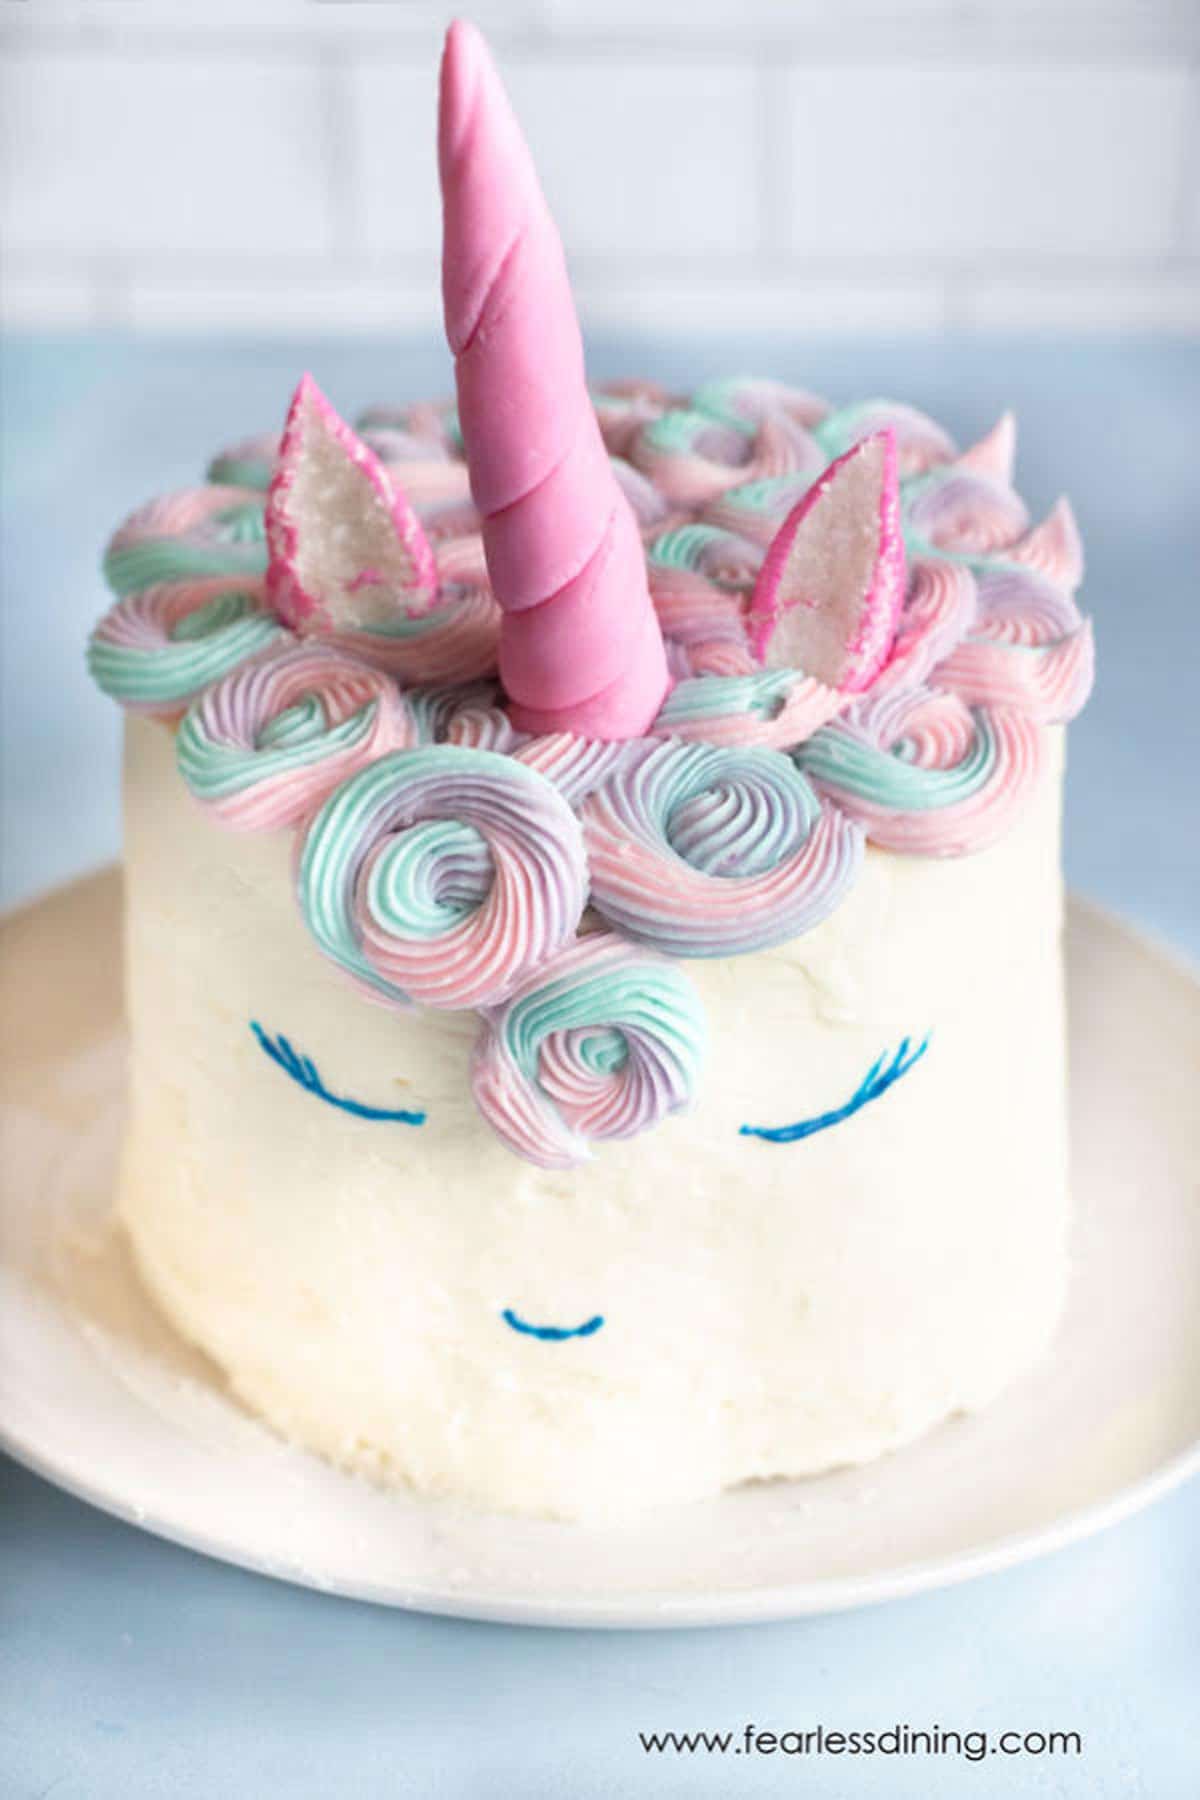 A decorated unicorn cake on a white plate.